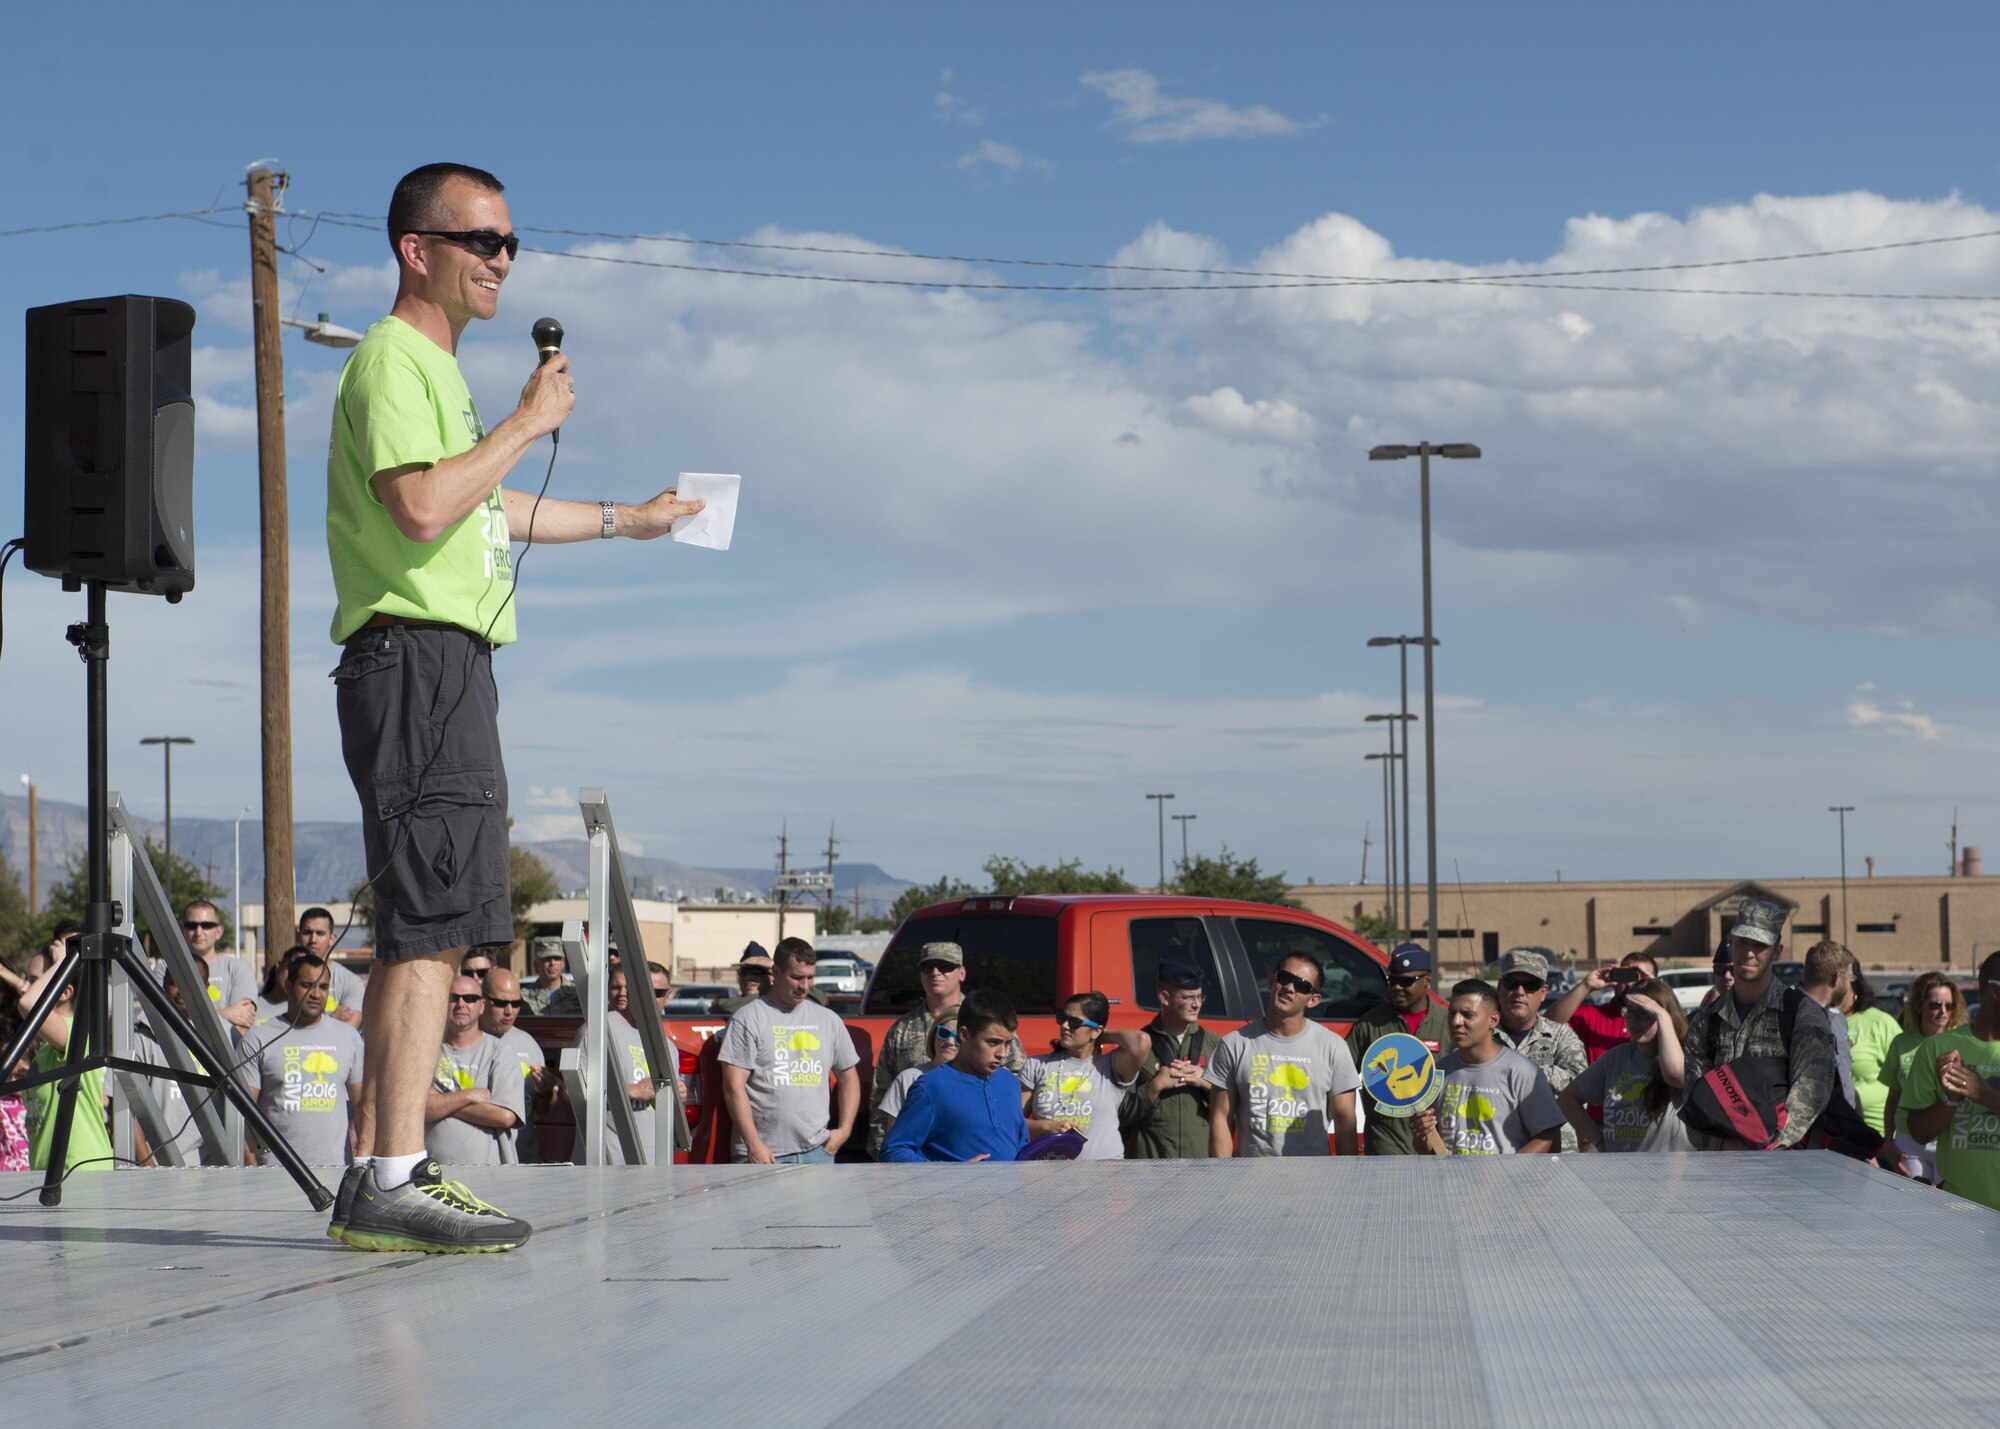 Col. Houston R. Cantwell, the commander of the 49th Wing, speaks to volunteers during the Big Give after-party August 12, 2016 at Holloman Air Force Base, N.M. Over the course of three weeks, 32 teams of 412 participants spent nearly 5,000 man hours volunteering in the local community — saving the area $202,092.33. (U.S. Air Force photo by Airman 1st Class Randahl J. Jenson)